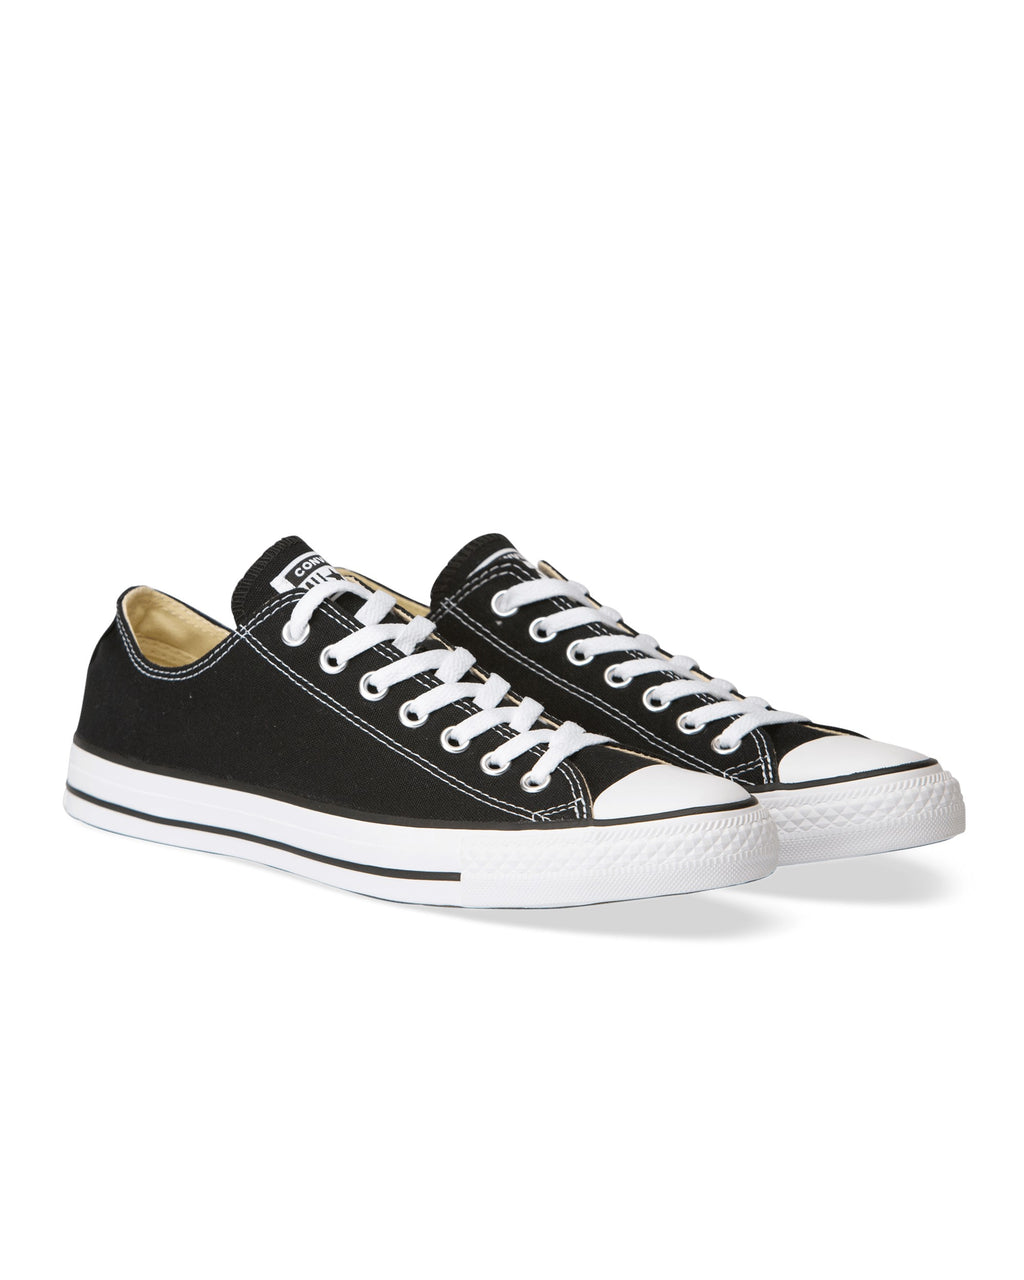 Converse Chuck Taylor All Star Classic Low Ox Black 19166 – Famous Rock ...